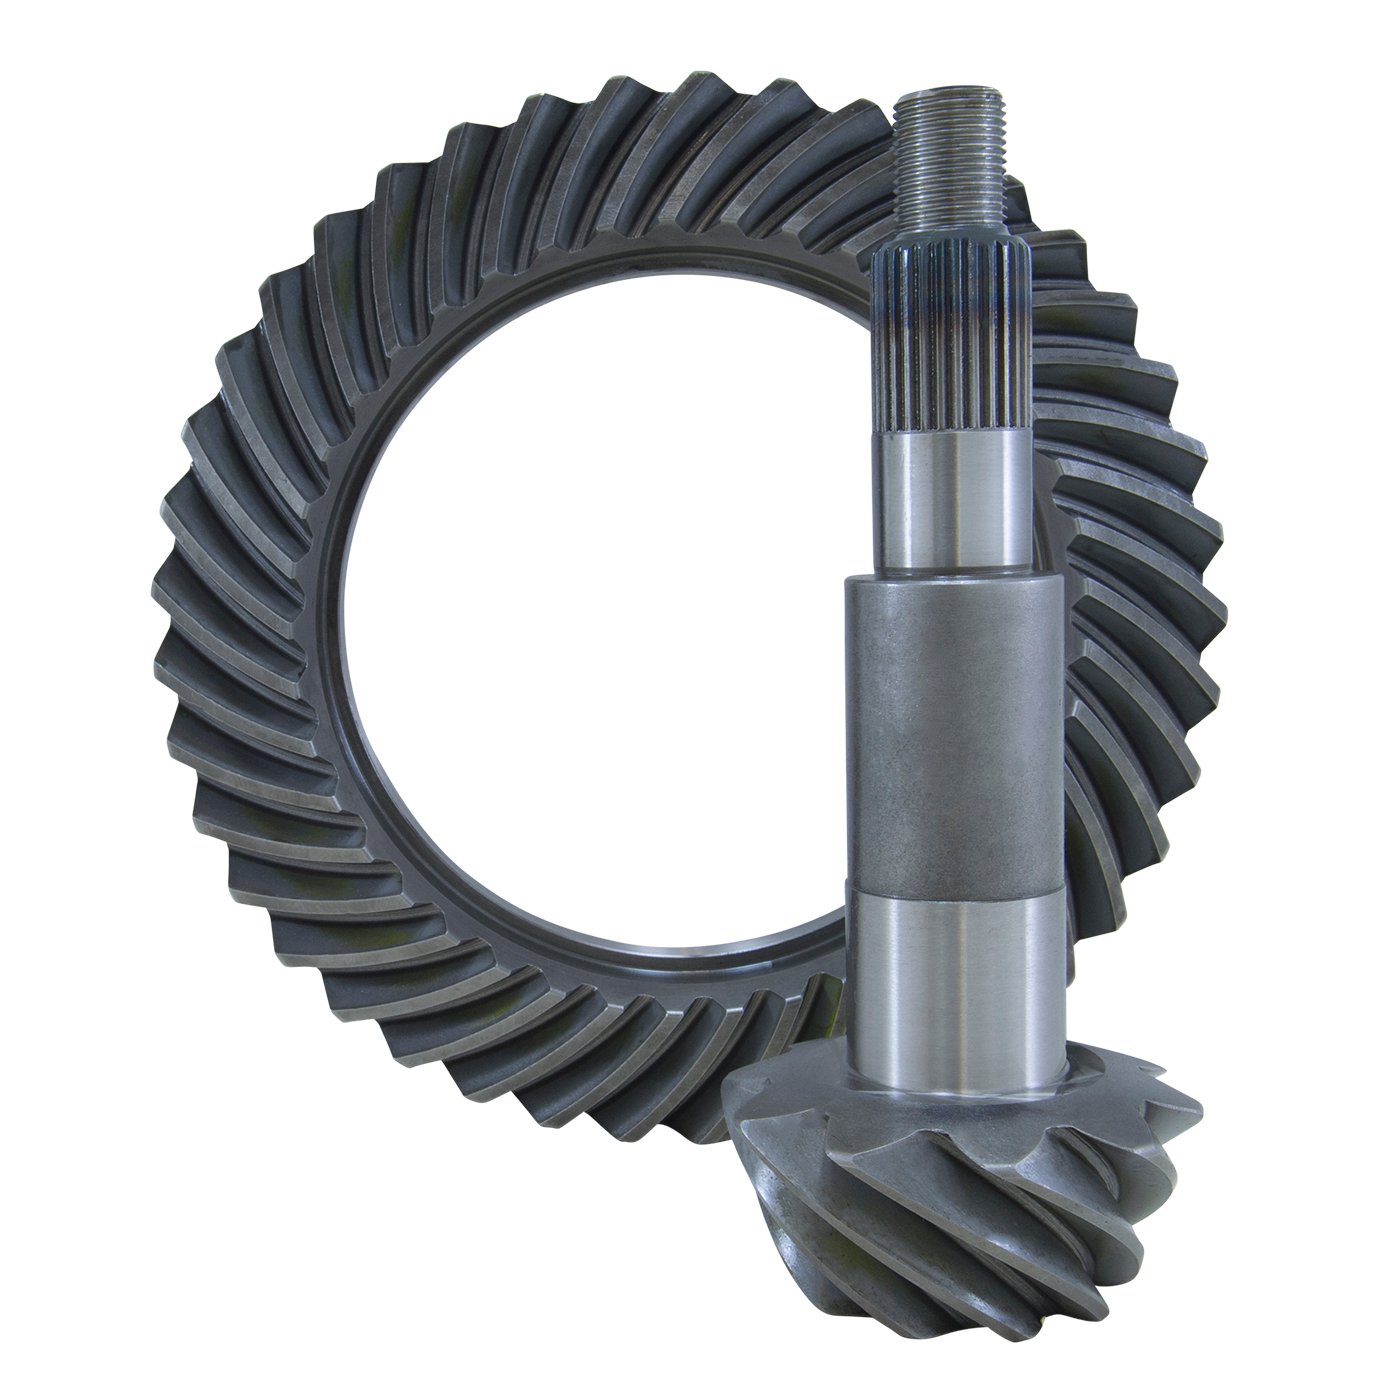 USA Standard ZG D70-456T Replacement Ring & Pinion Gear Set, For Dana 70, 4.56 Ratio, Thick